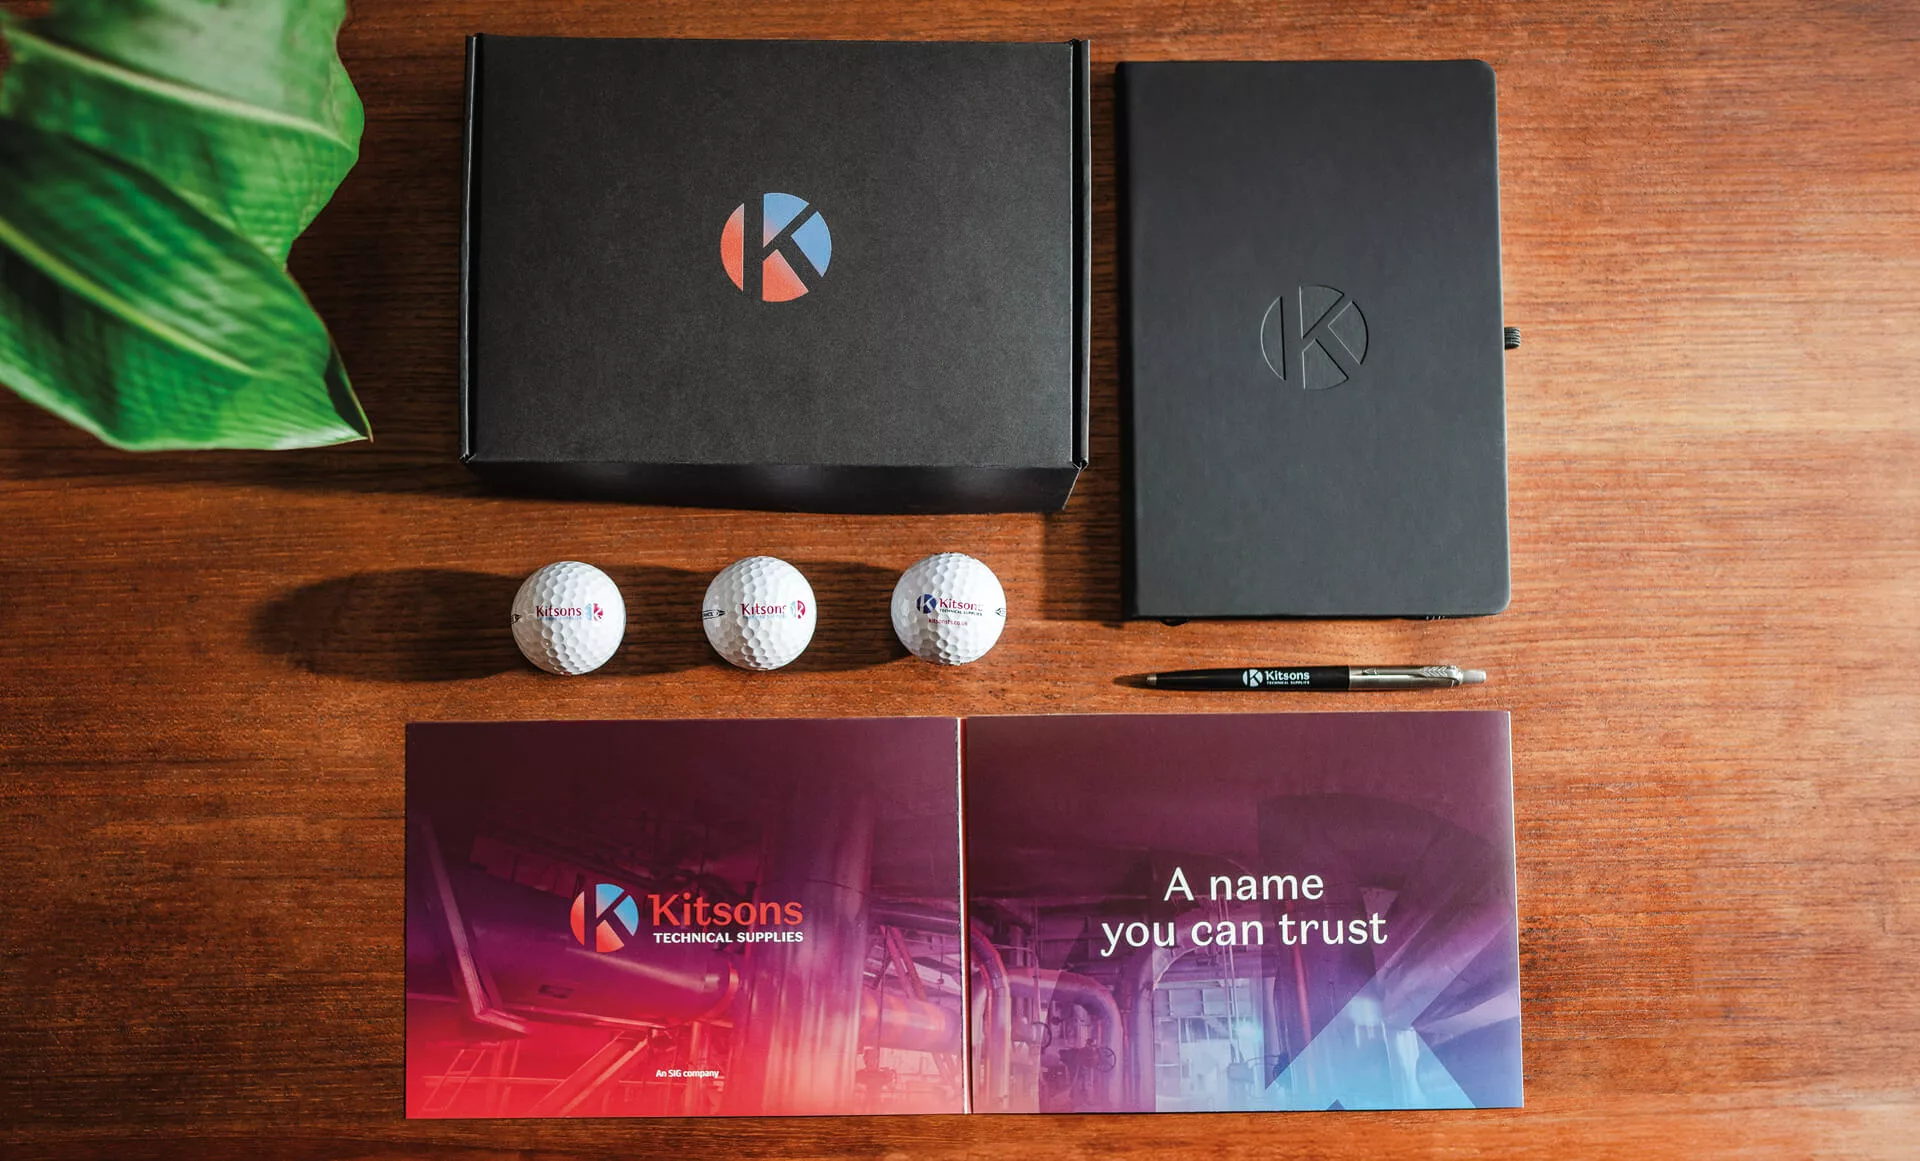 The contents of a box created for key customers of Kitsons